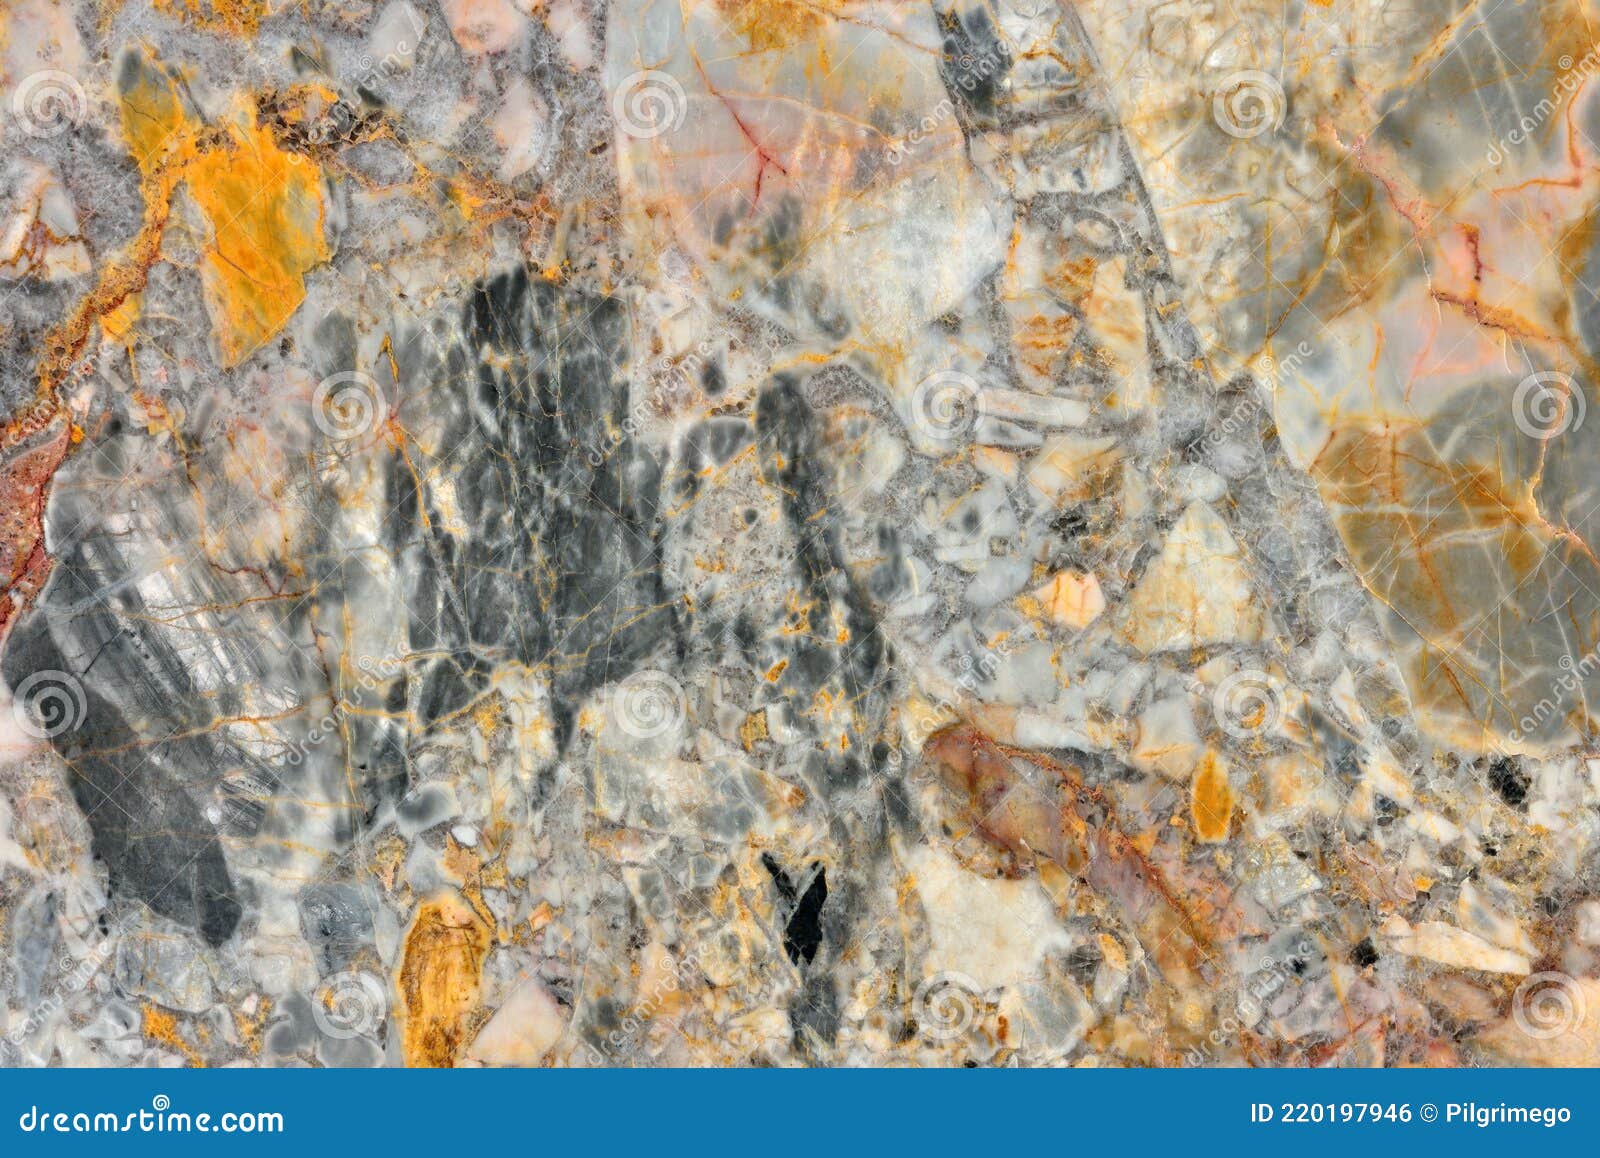 real natural stone mineral textures and background